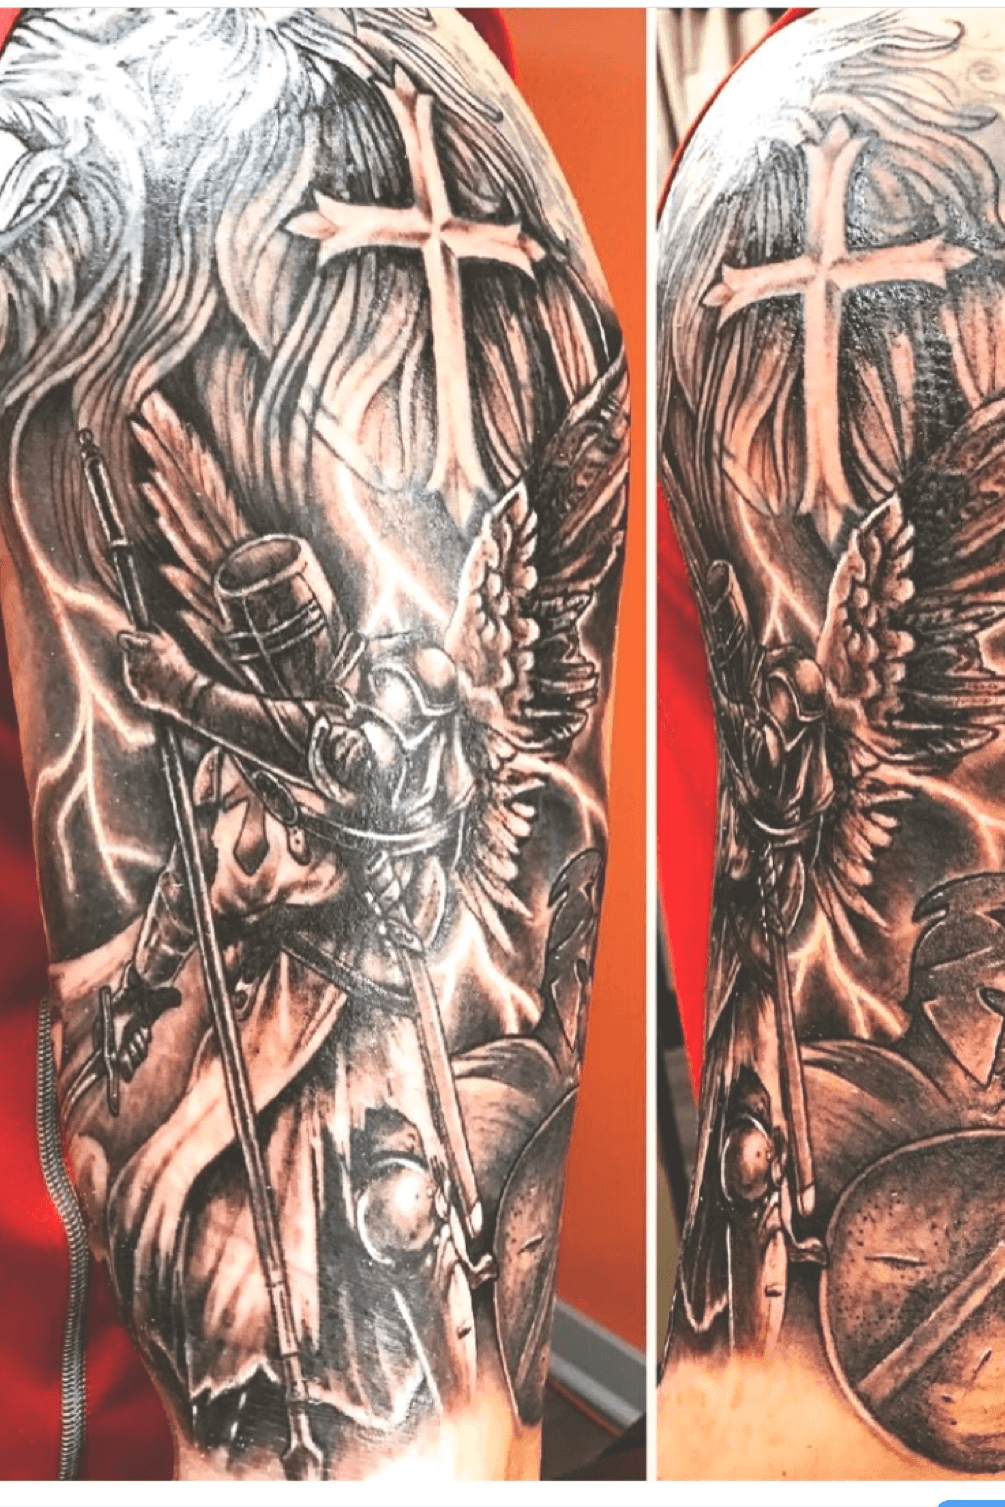 Divine Protection expressed in St Michael the Archangel as a warrior tattoo